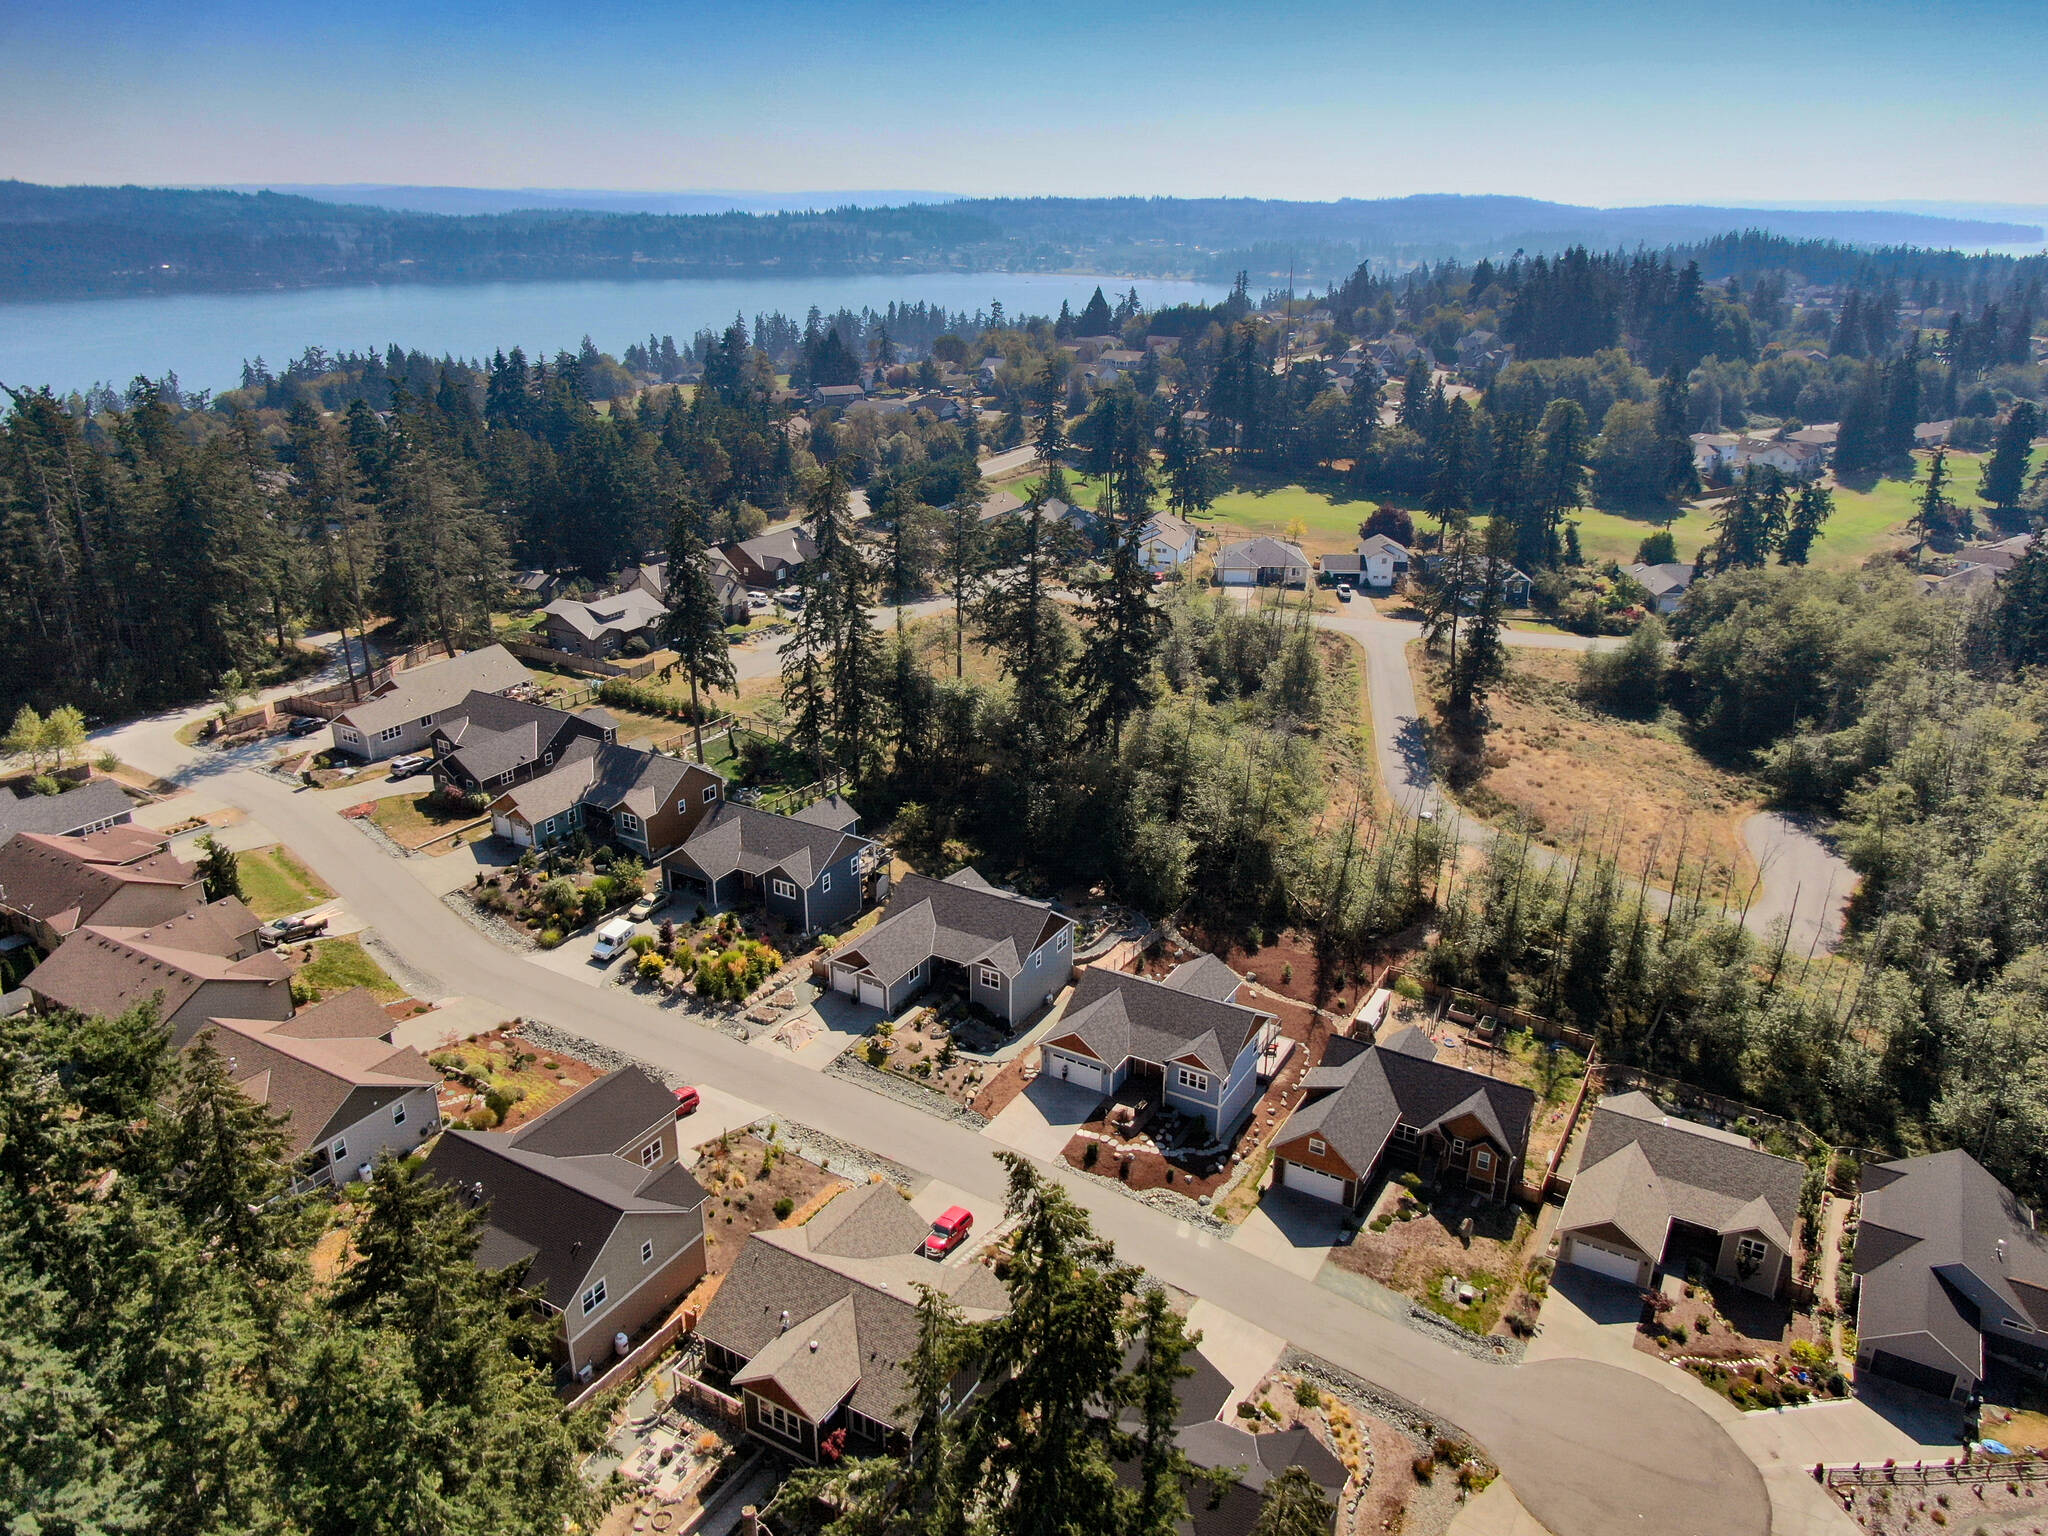 Recent high interest rates have slowed what was a red-hot housing market on Whidbey Island. (Photo provided by Windermere)